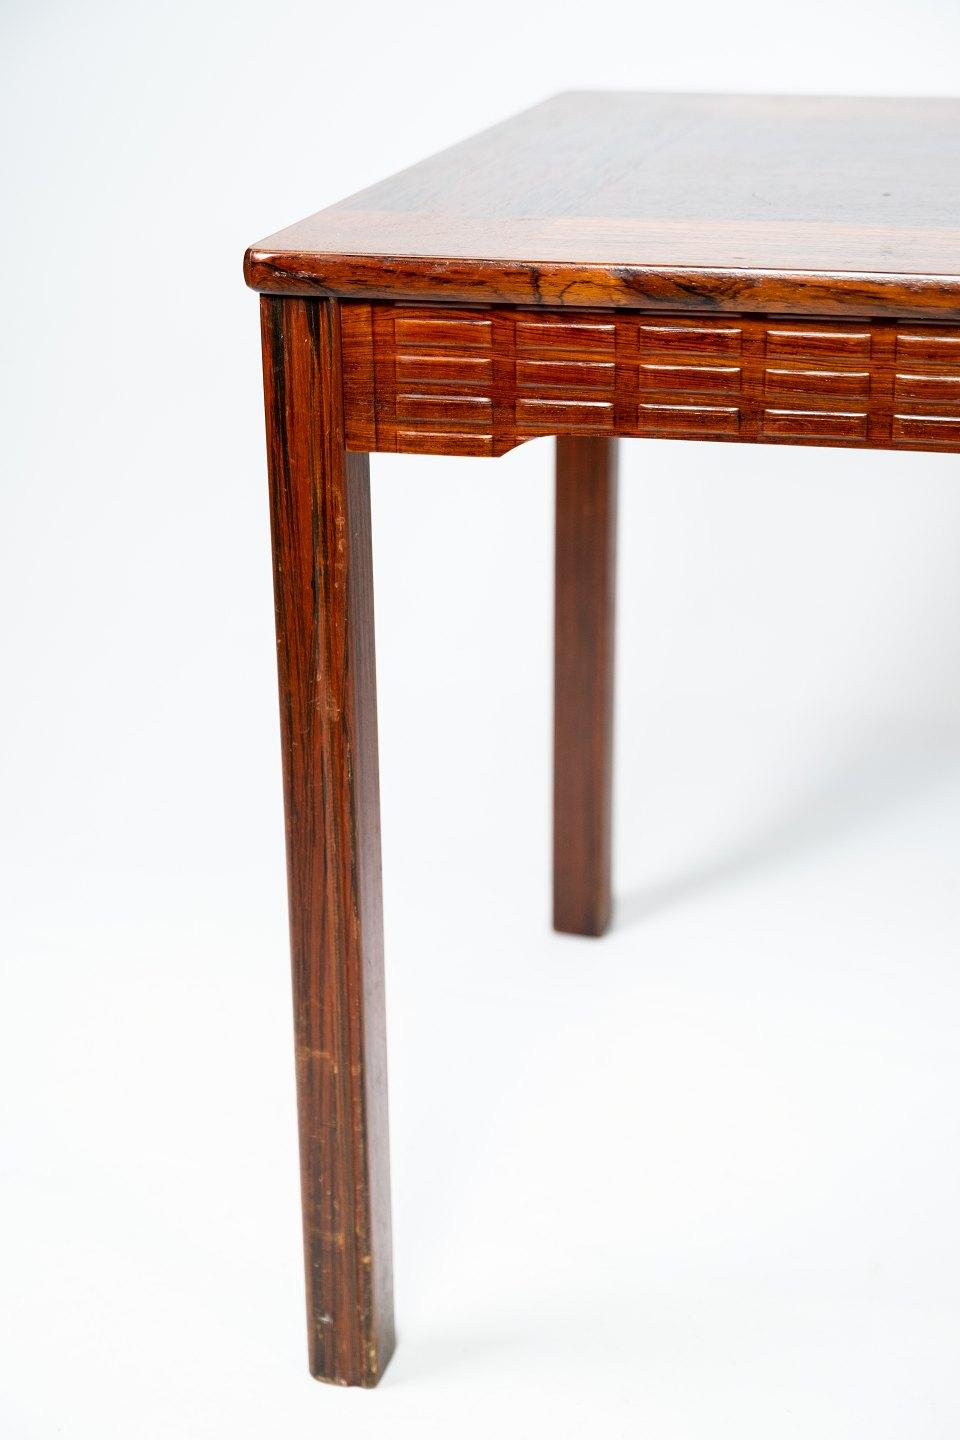 Mid-Century Modern Coffee Table in Rosewood of Danish Design from the 1960s For Sale